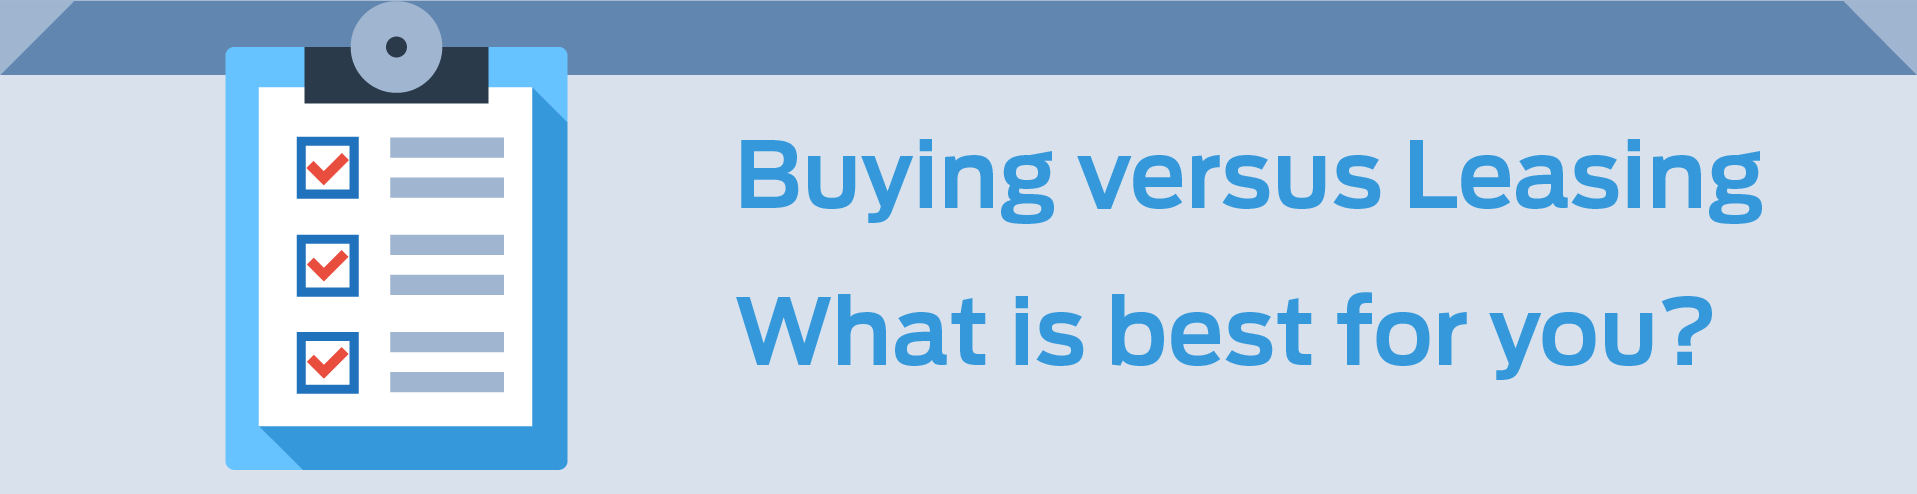 buying-versus-leasing-what-is-best-for-you